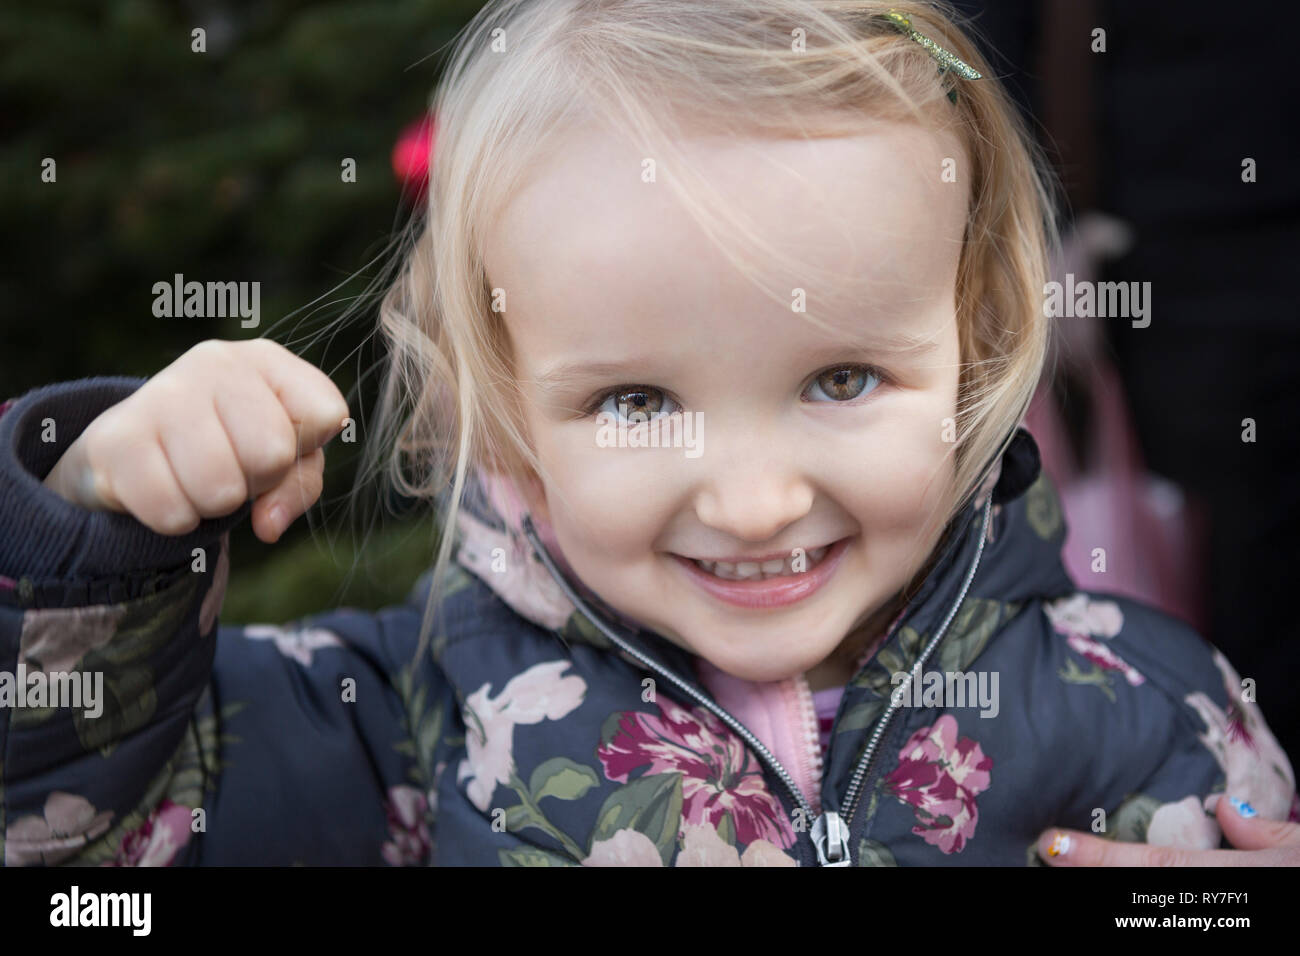 Young girl making punching fist with hand mischievously towards the camera Stock Photo